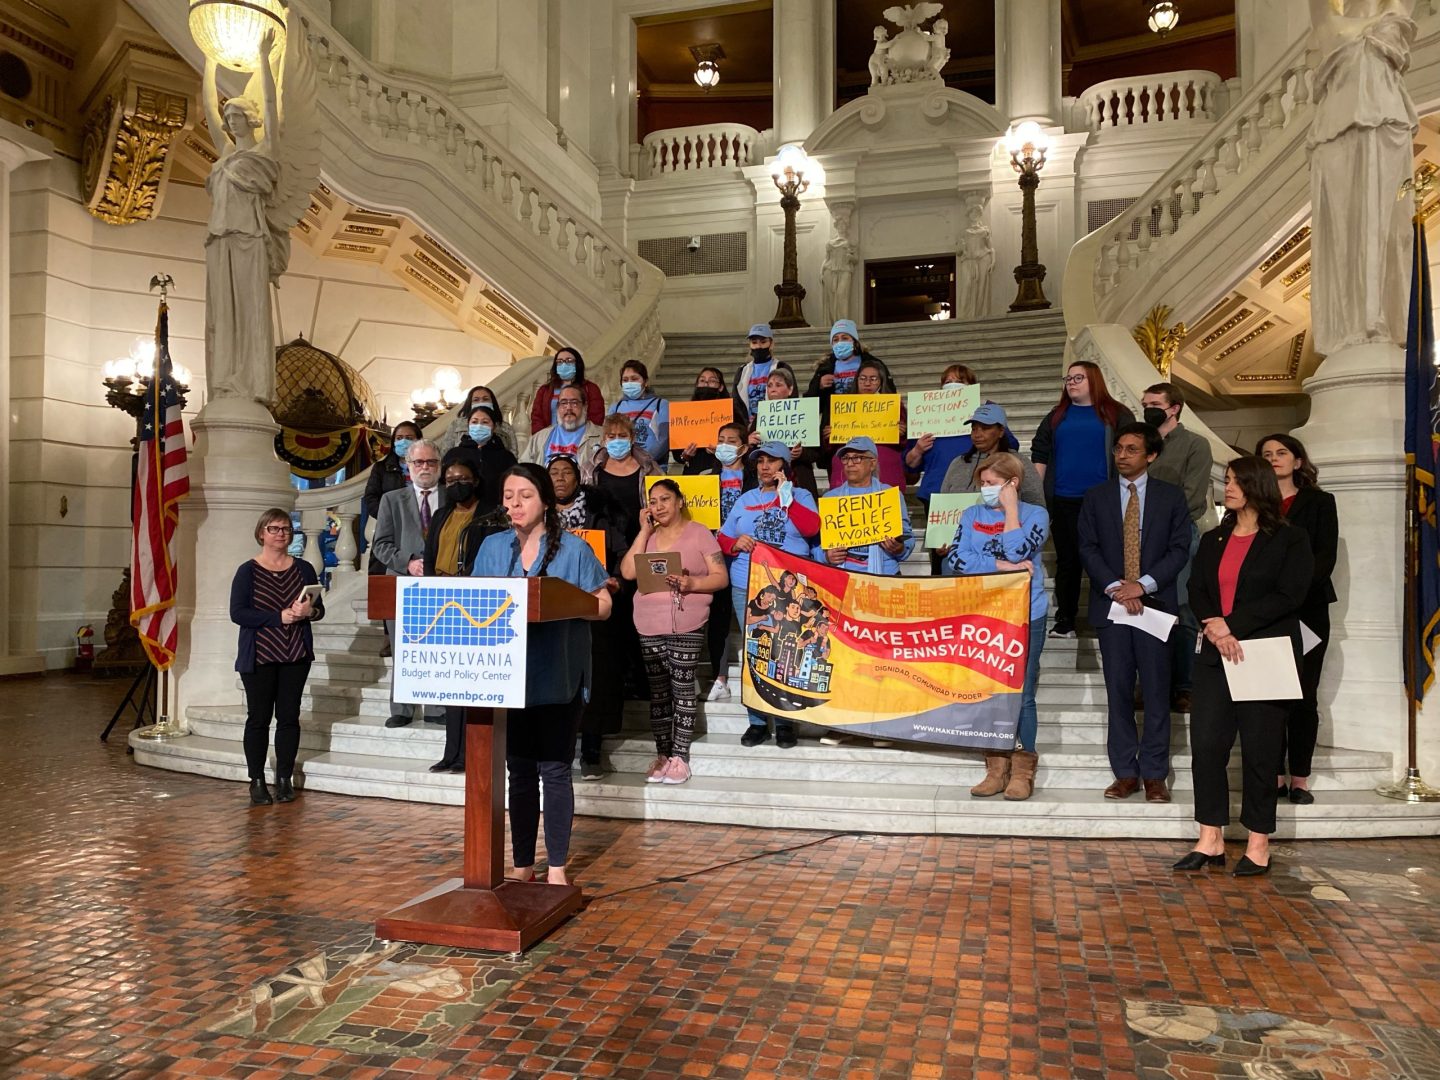 Patty Torres, organizing director for Latino advocacy group Make The Road PA, speaks at the capital. She's accompanied by member leaders of Make The Road, State Sen. Nikil Saval, and State Representatives Sara Innamorato and Elizabeth Fiedler.